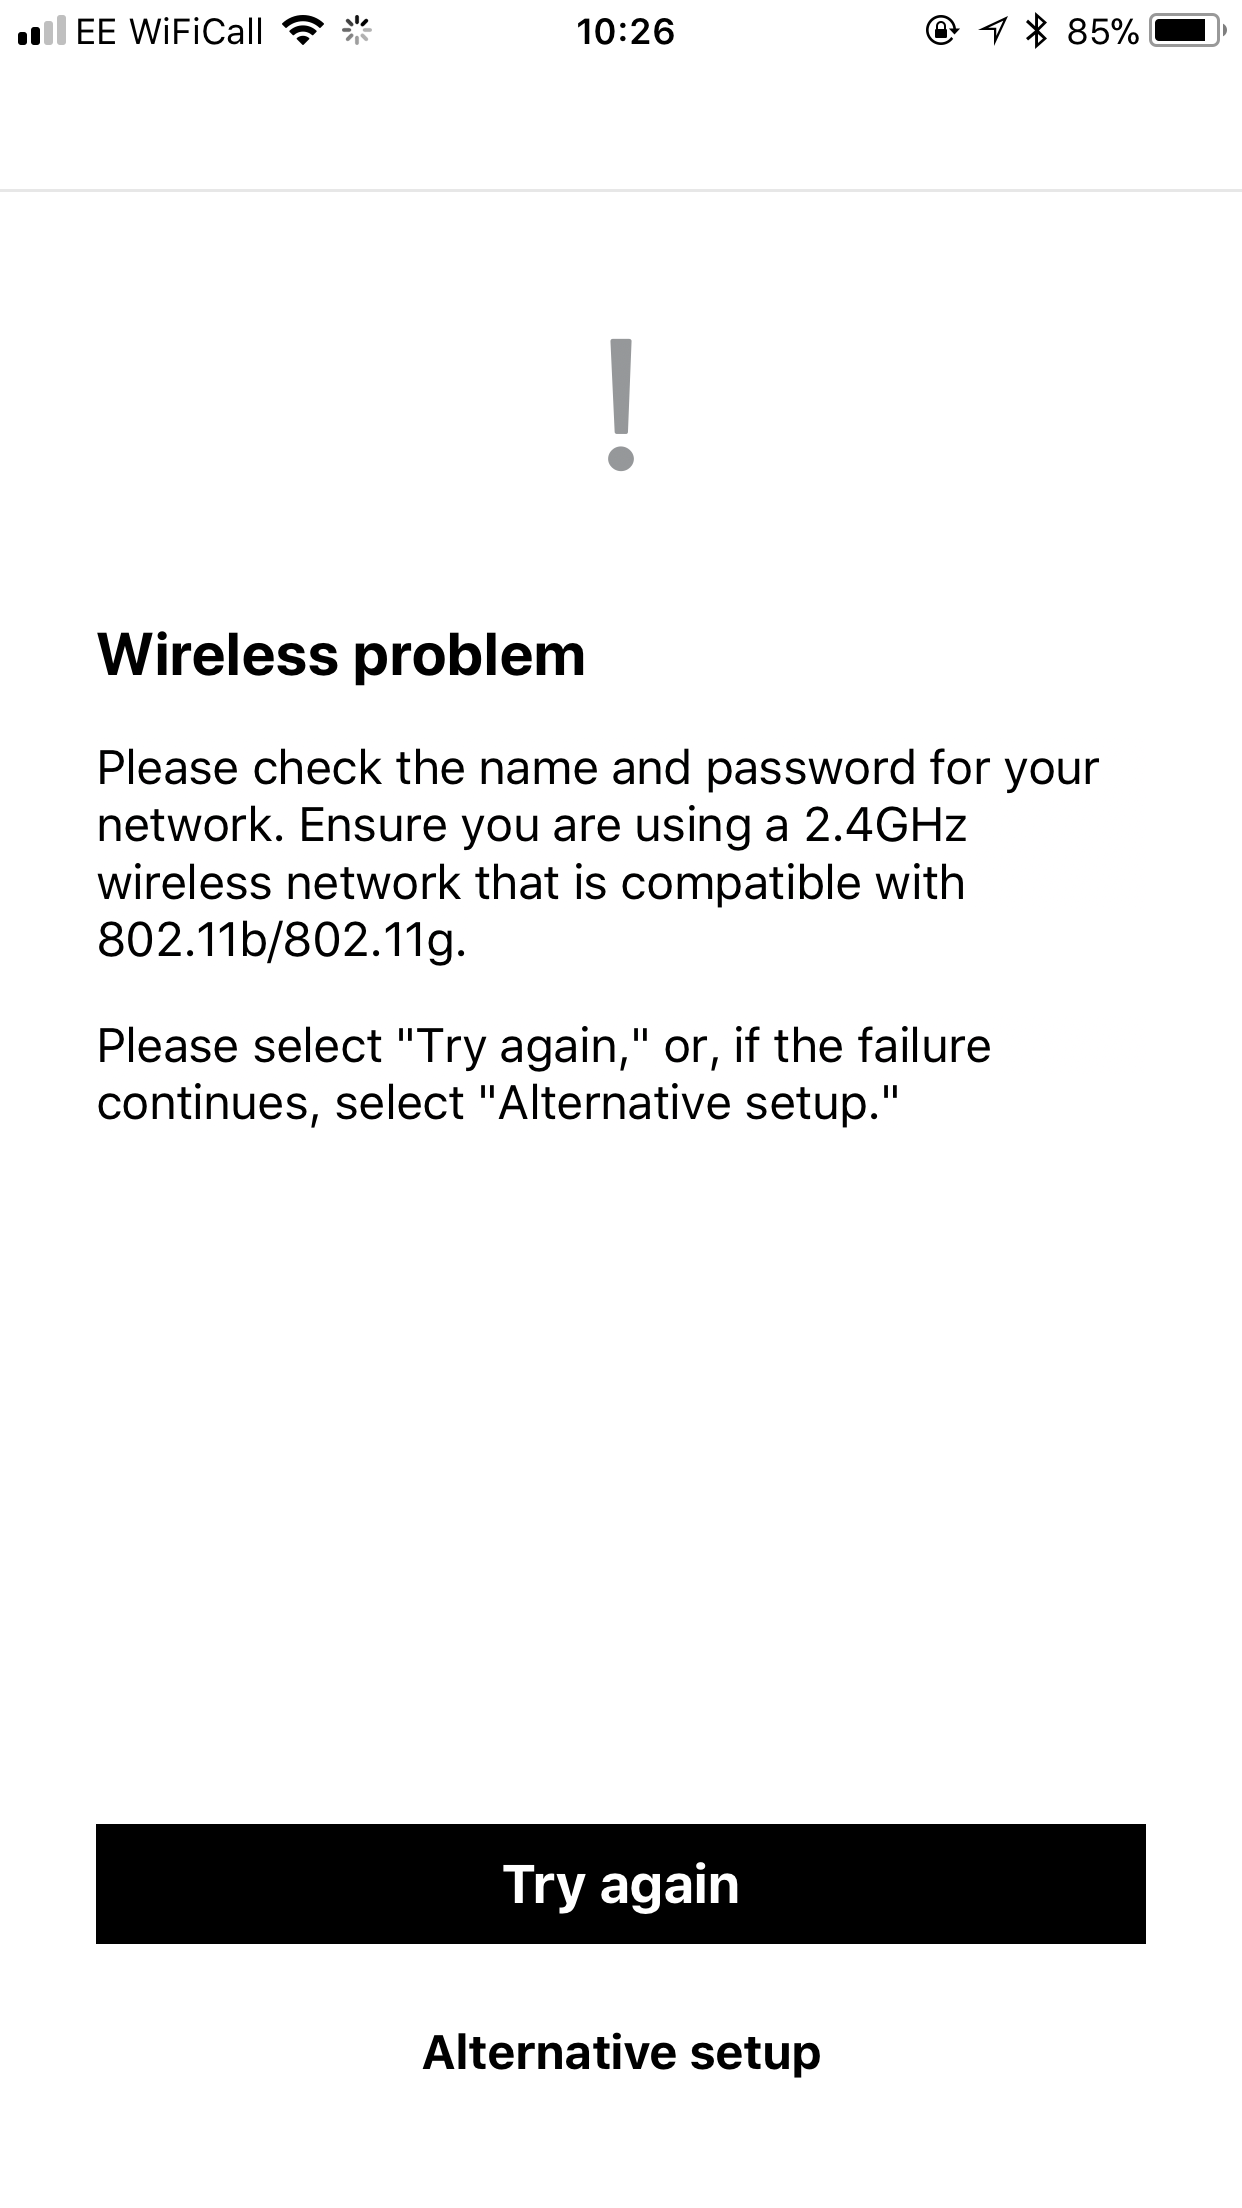 I don't SONOS in my network when I try to set up my Sonos! Sonos Community